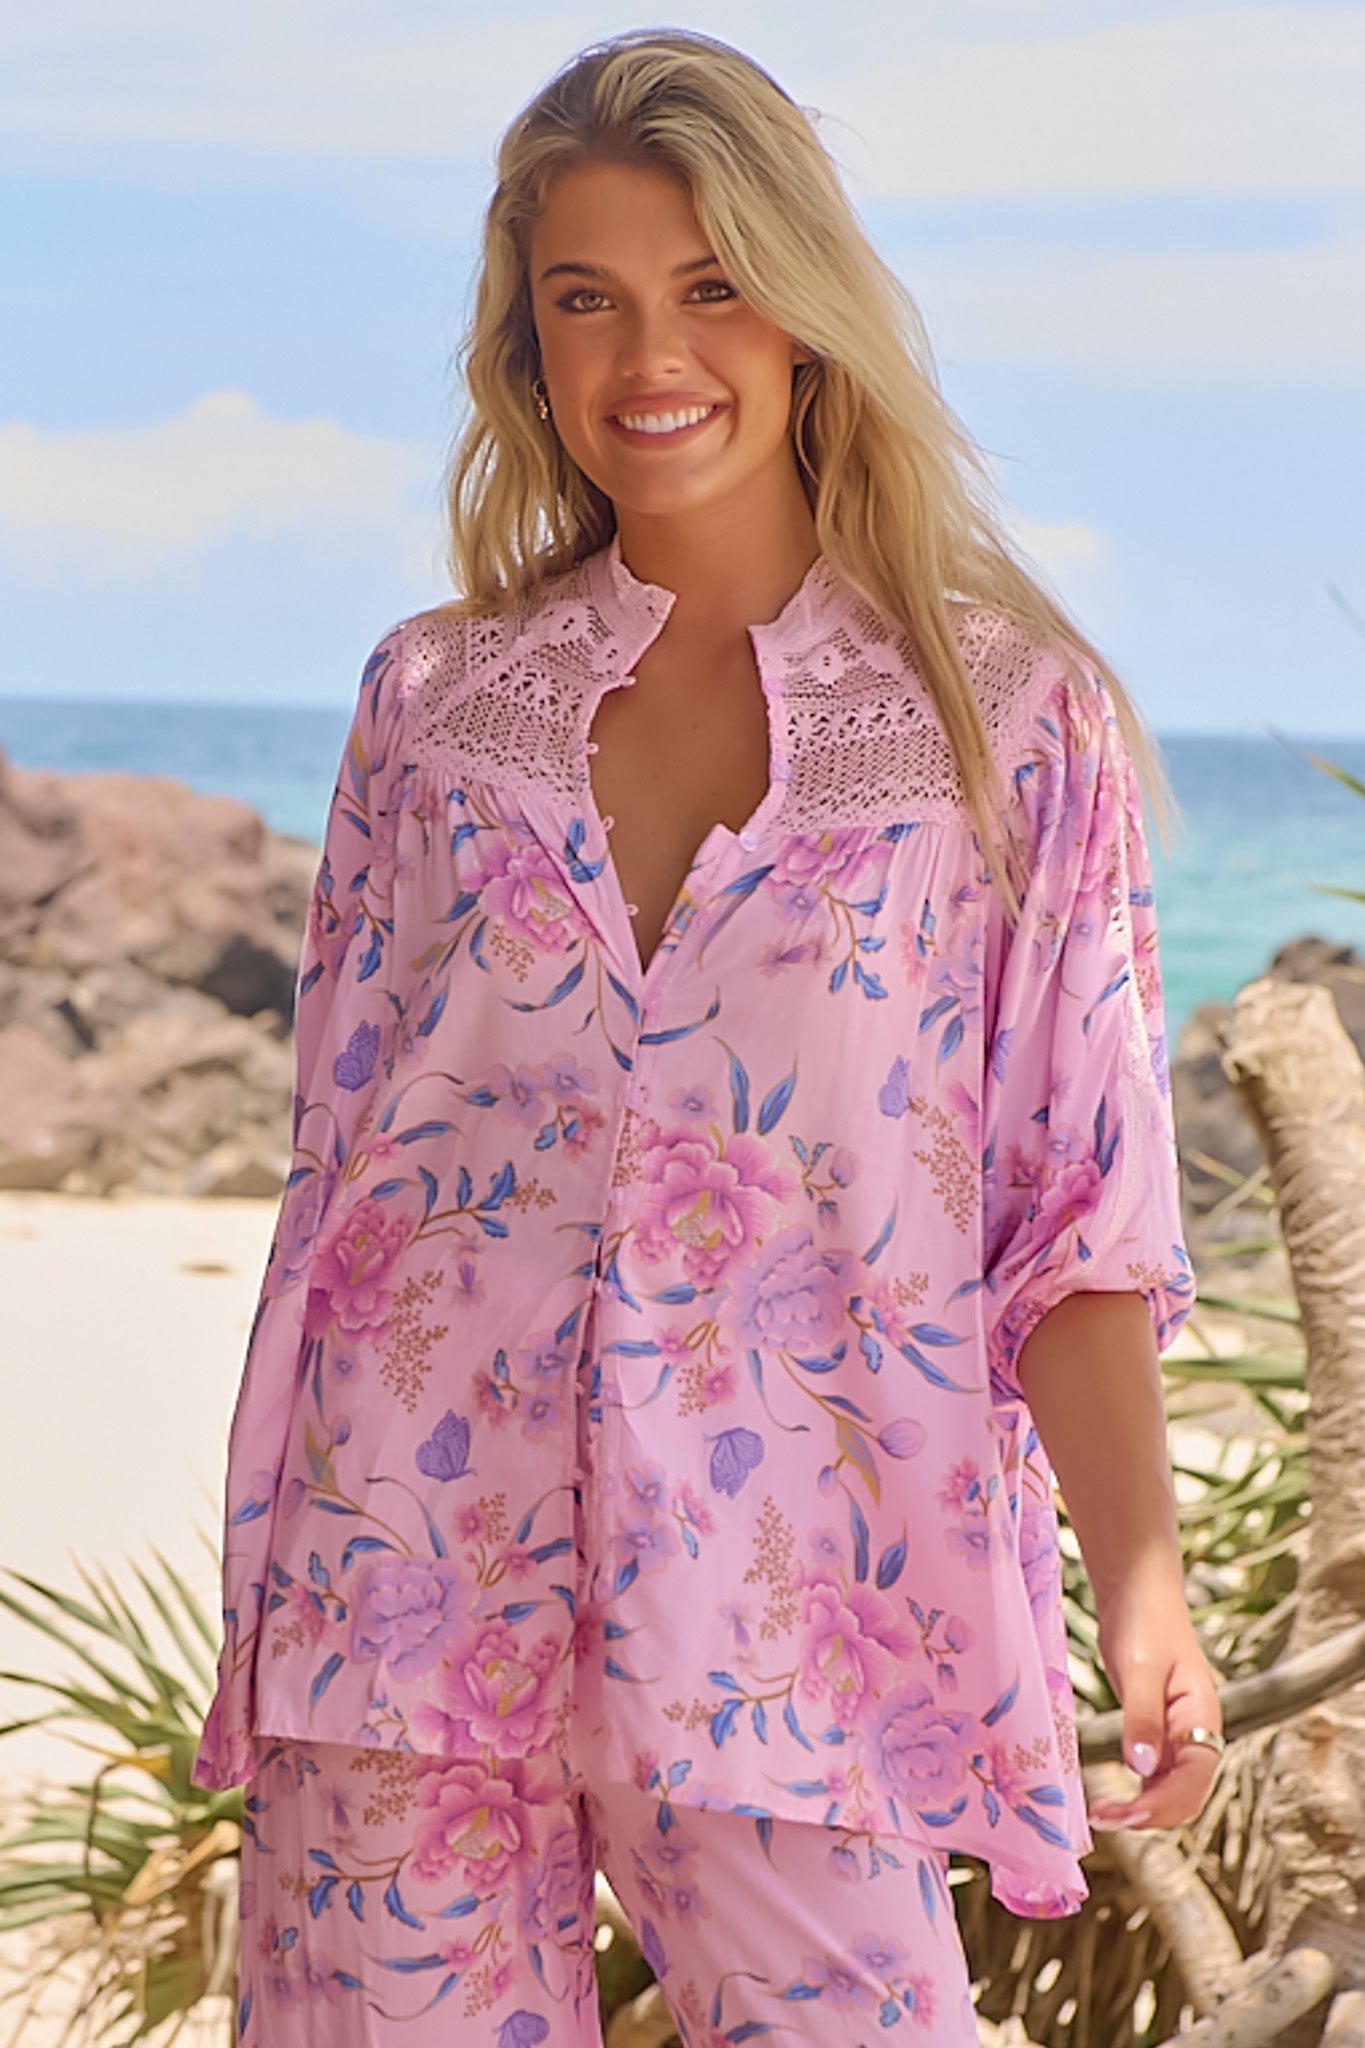 JAASE - Florence Blouse: Lace Shoulders Button Down Blouse in Enchanted Blooms Print